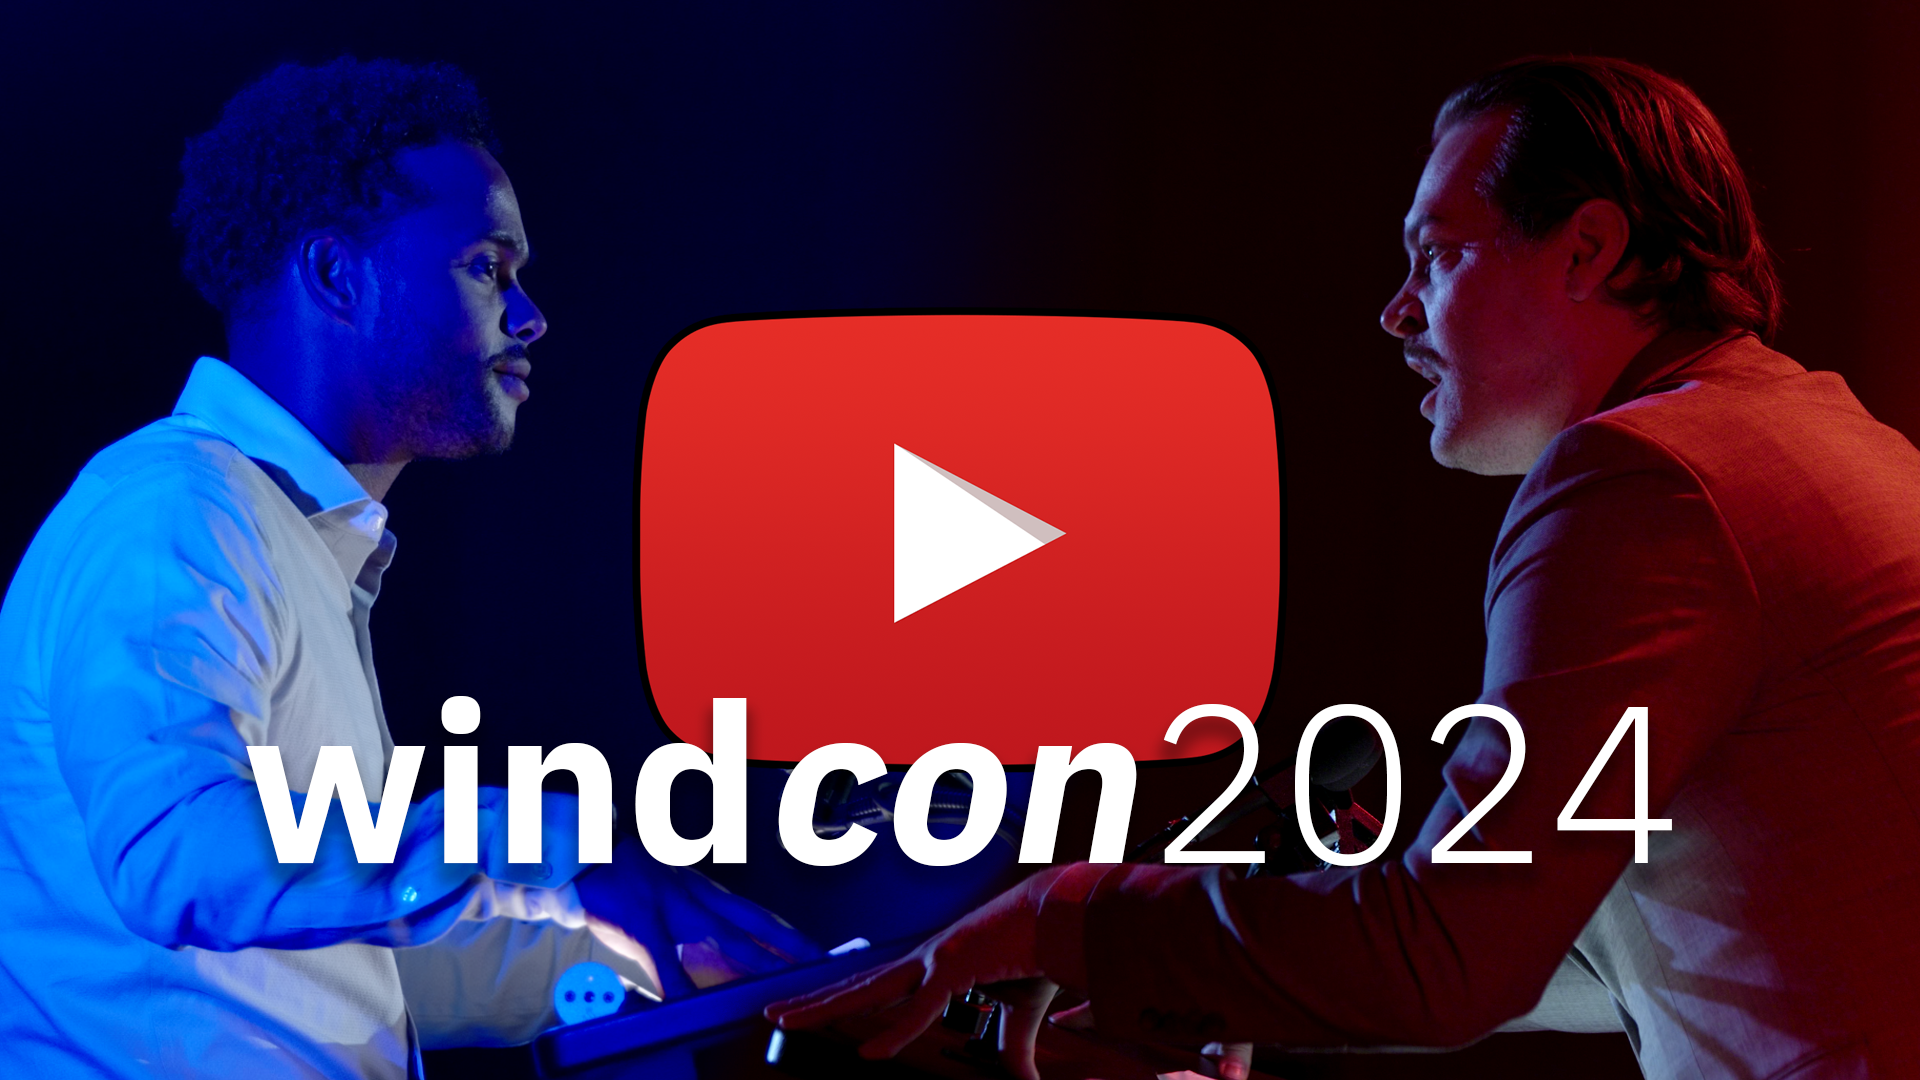 YouTube title card for WindCon 2024 showing the host and Commissioner Boredom